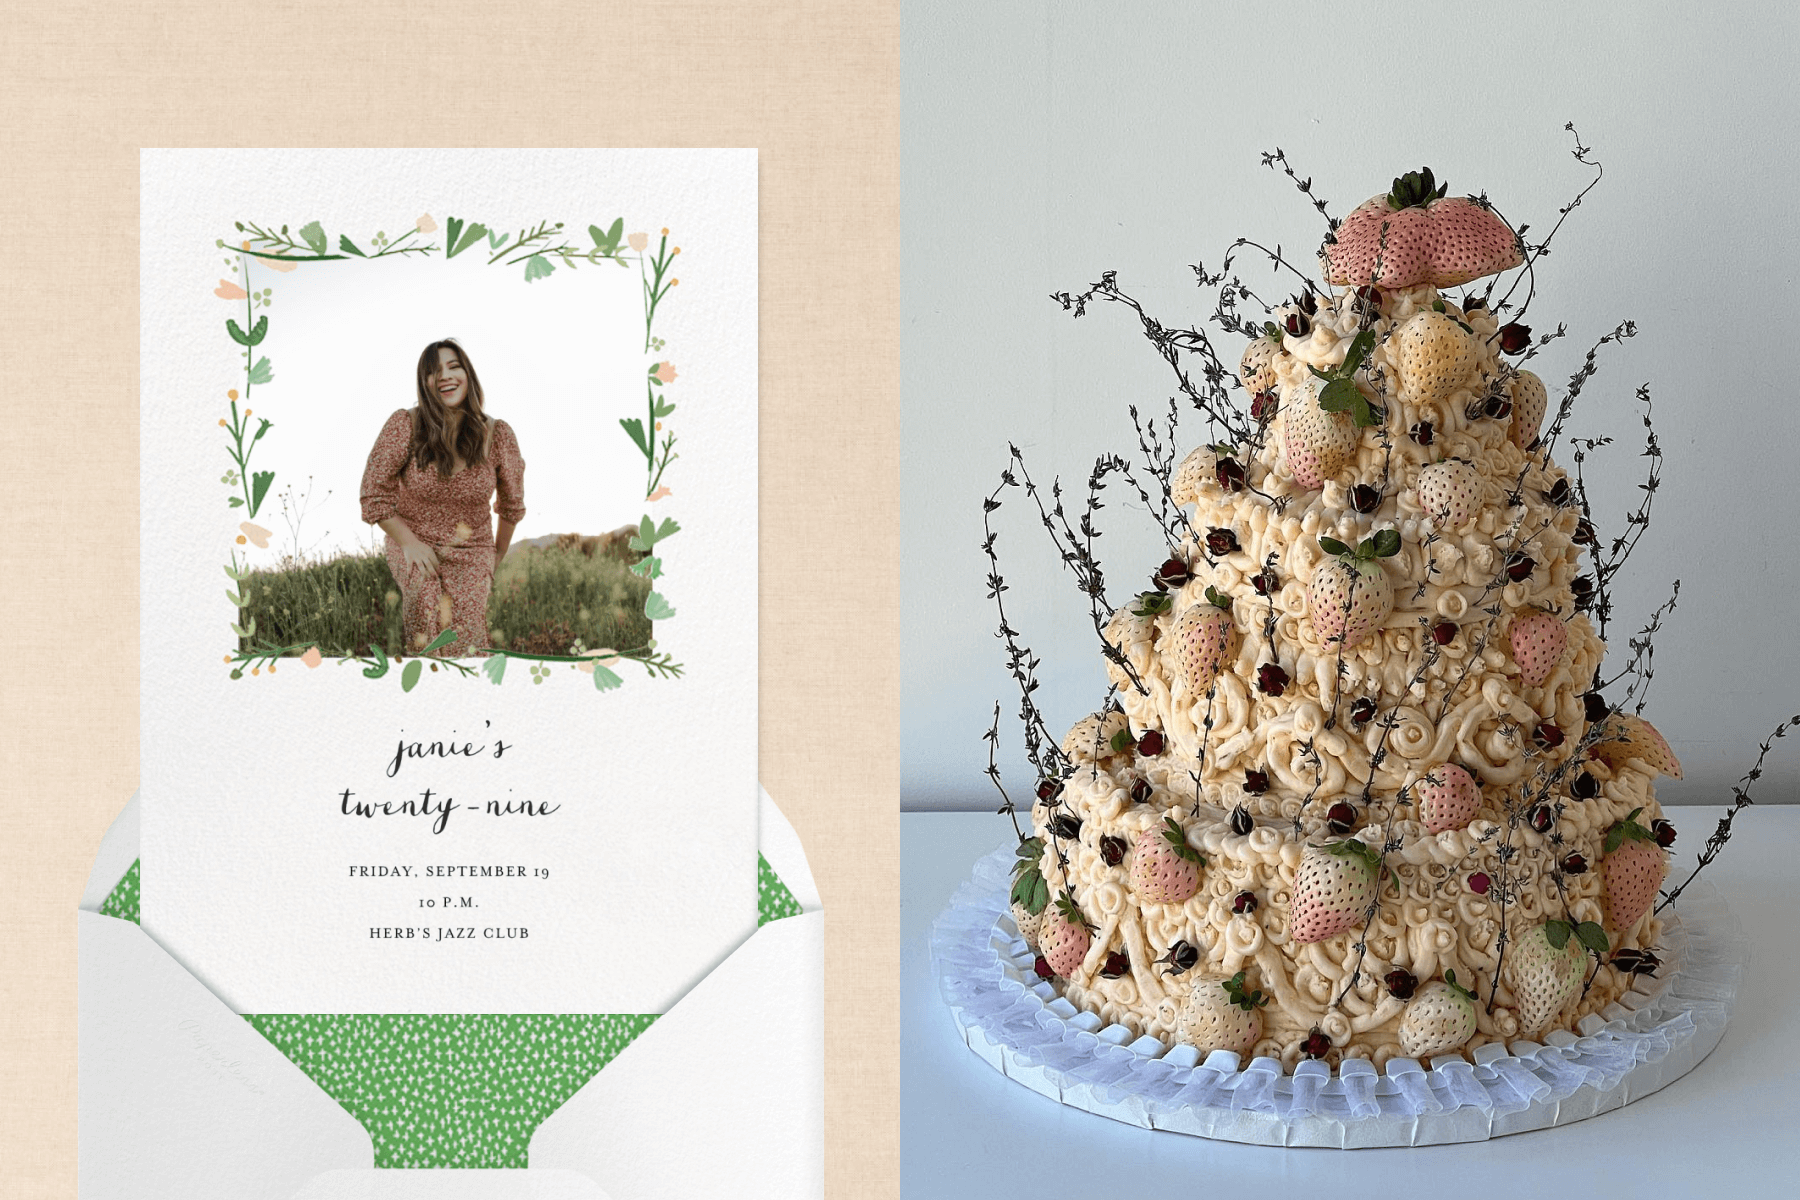 A white birthday invitation has a photo of a woman in a field with a delicately drawn flower border, and an envelope with a green liner dotted with white stars. Right: An ornate beige-colored tiered cake covered in pale strawberries with thin, leaved stems sticking out vertically.